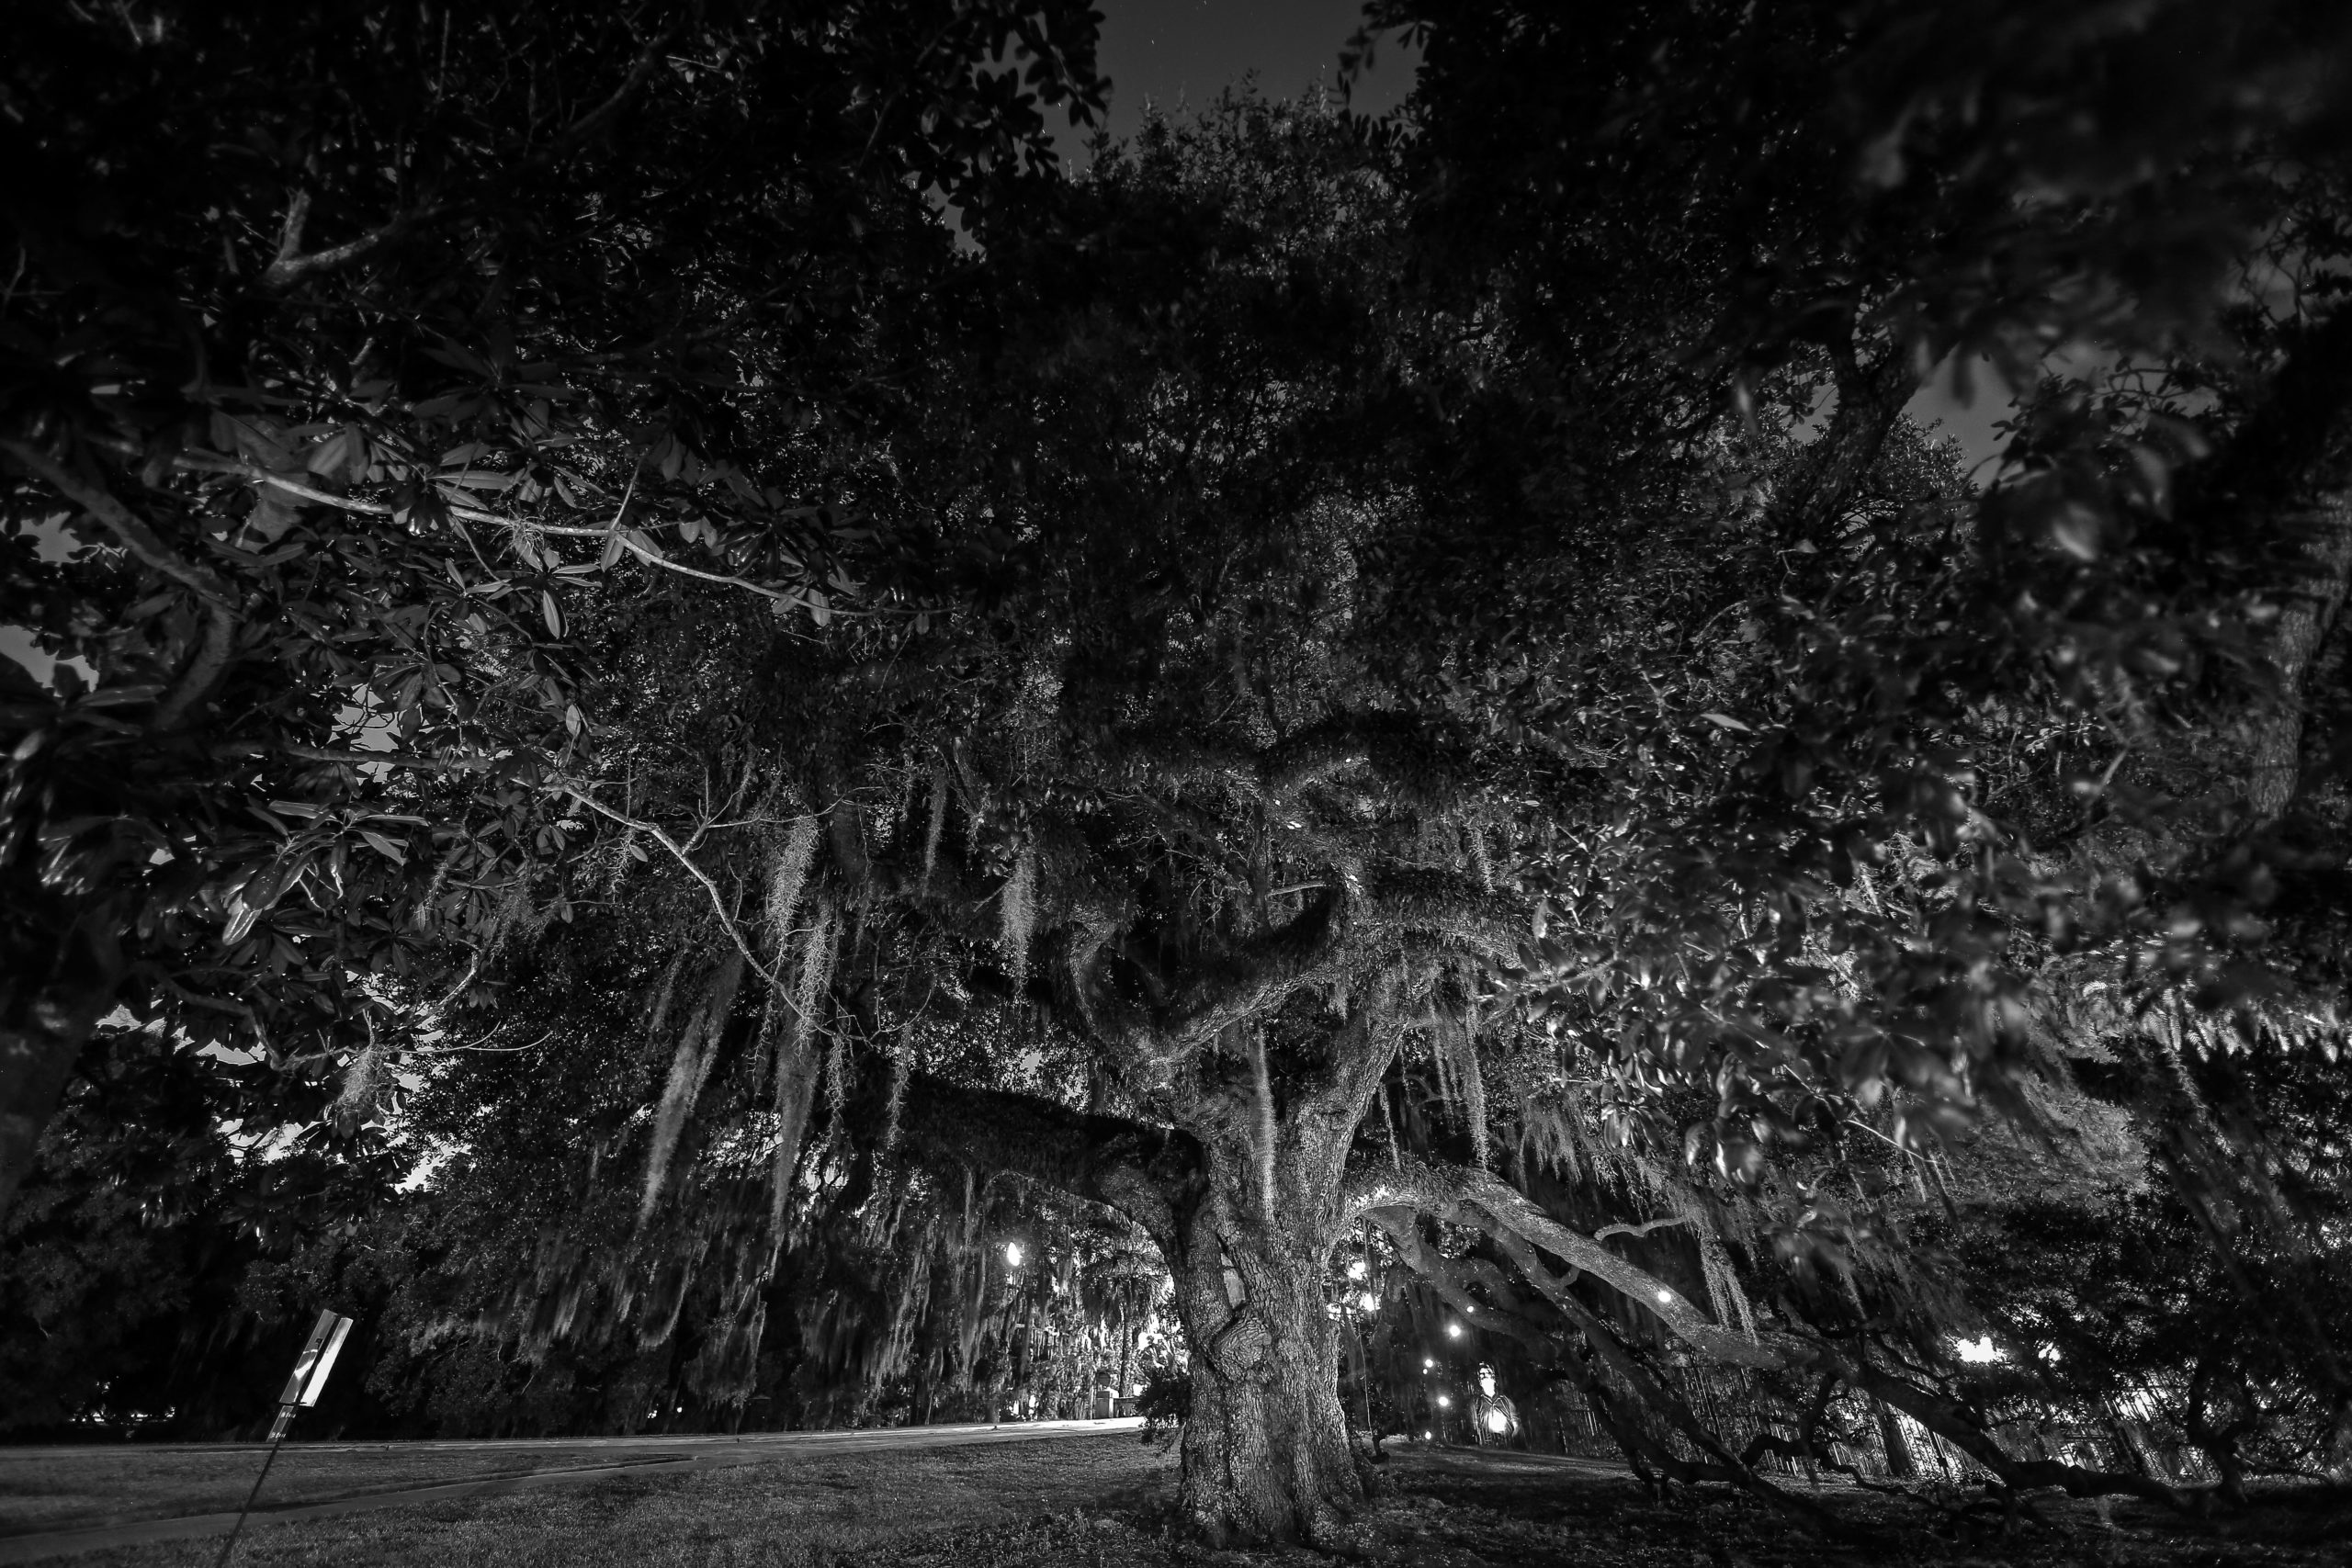 The Duelling Tree in City Park is said to be haunted by the ghosts of the 19th century duelists who died while settling affairs of honor. (Photo by Michael DeMocker)